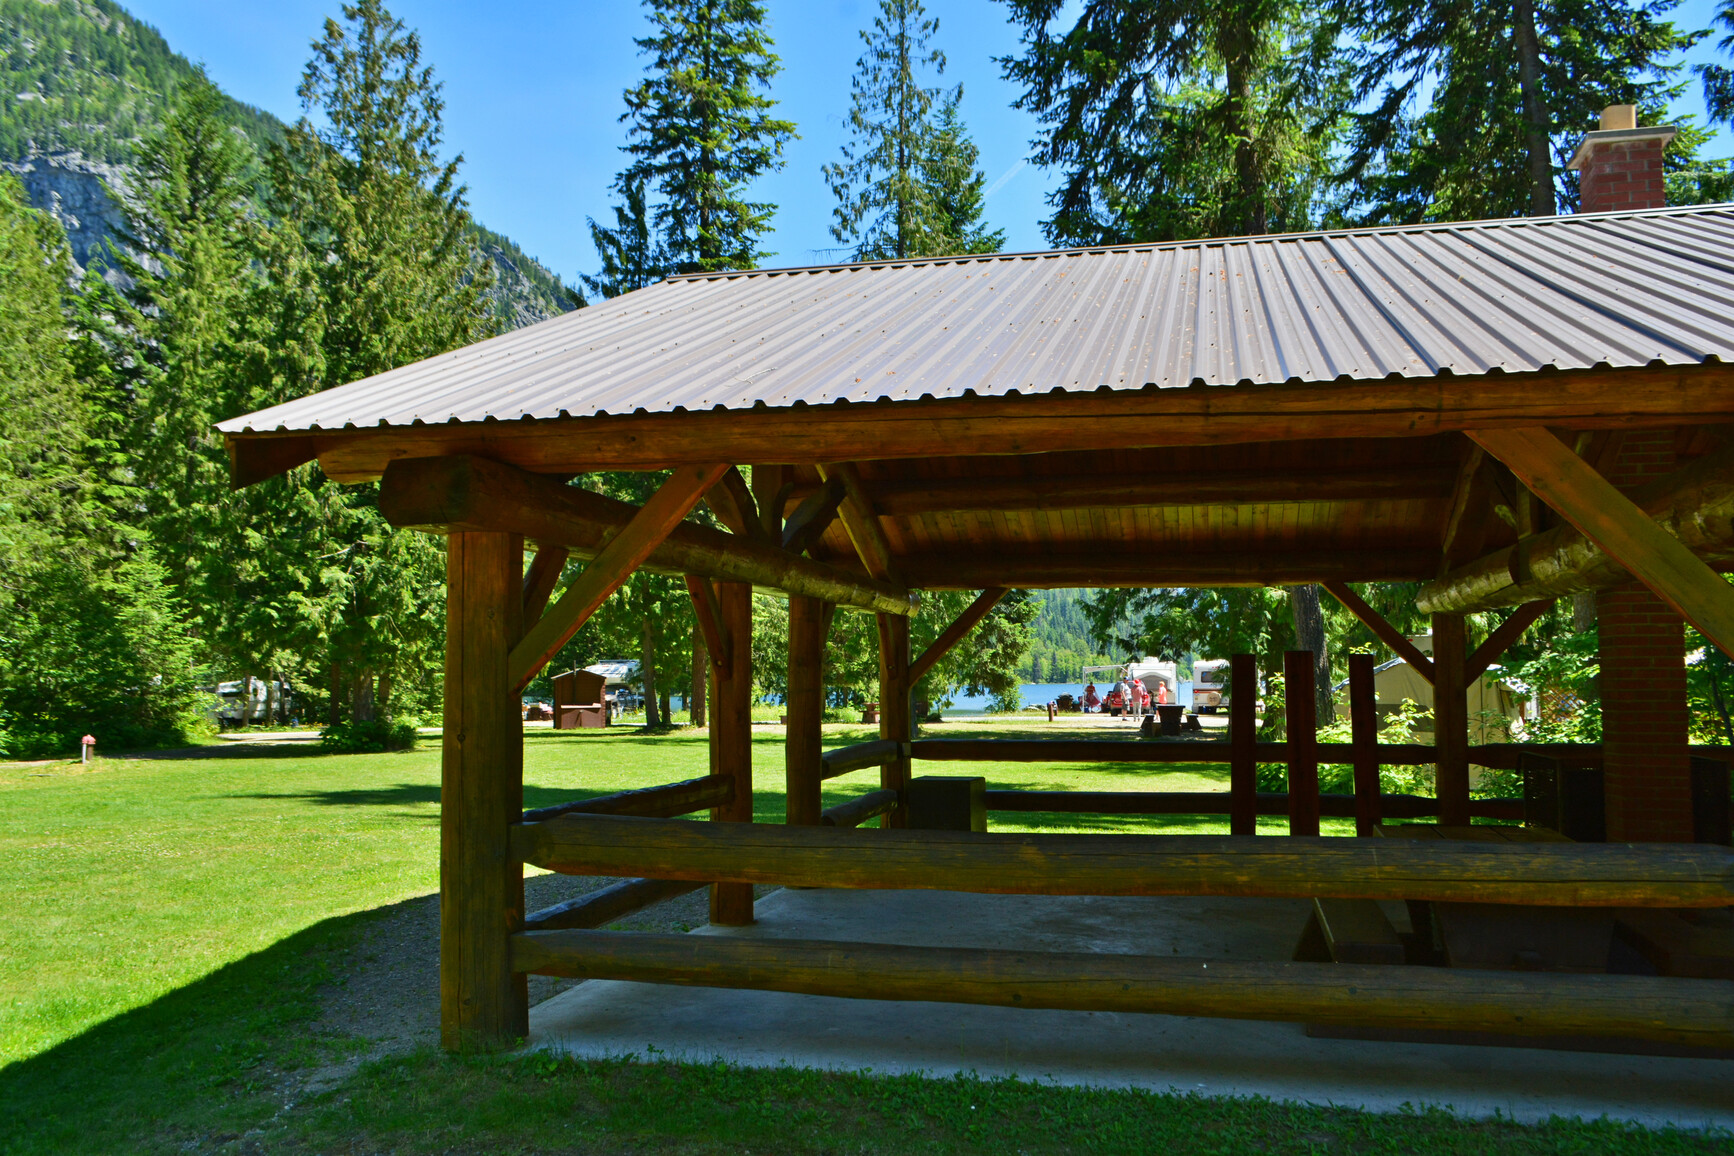 The picnic shelter at Summit Lake campground. The lake and mountains are in the background.